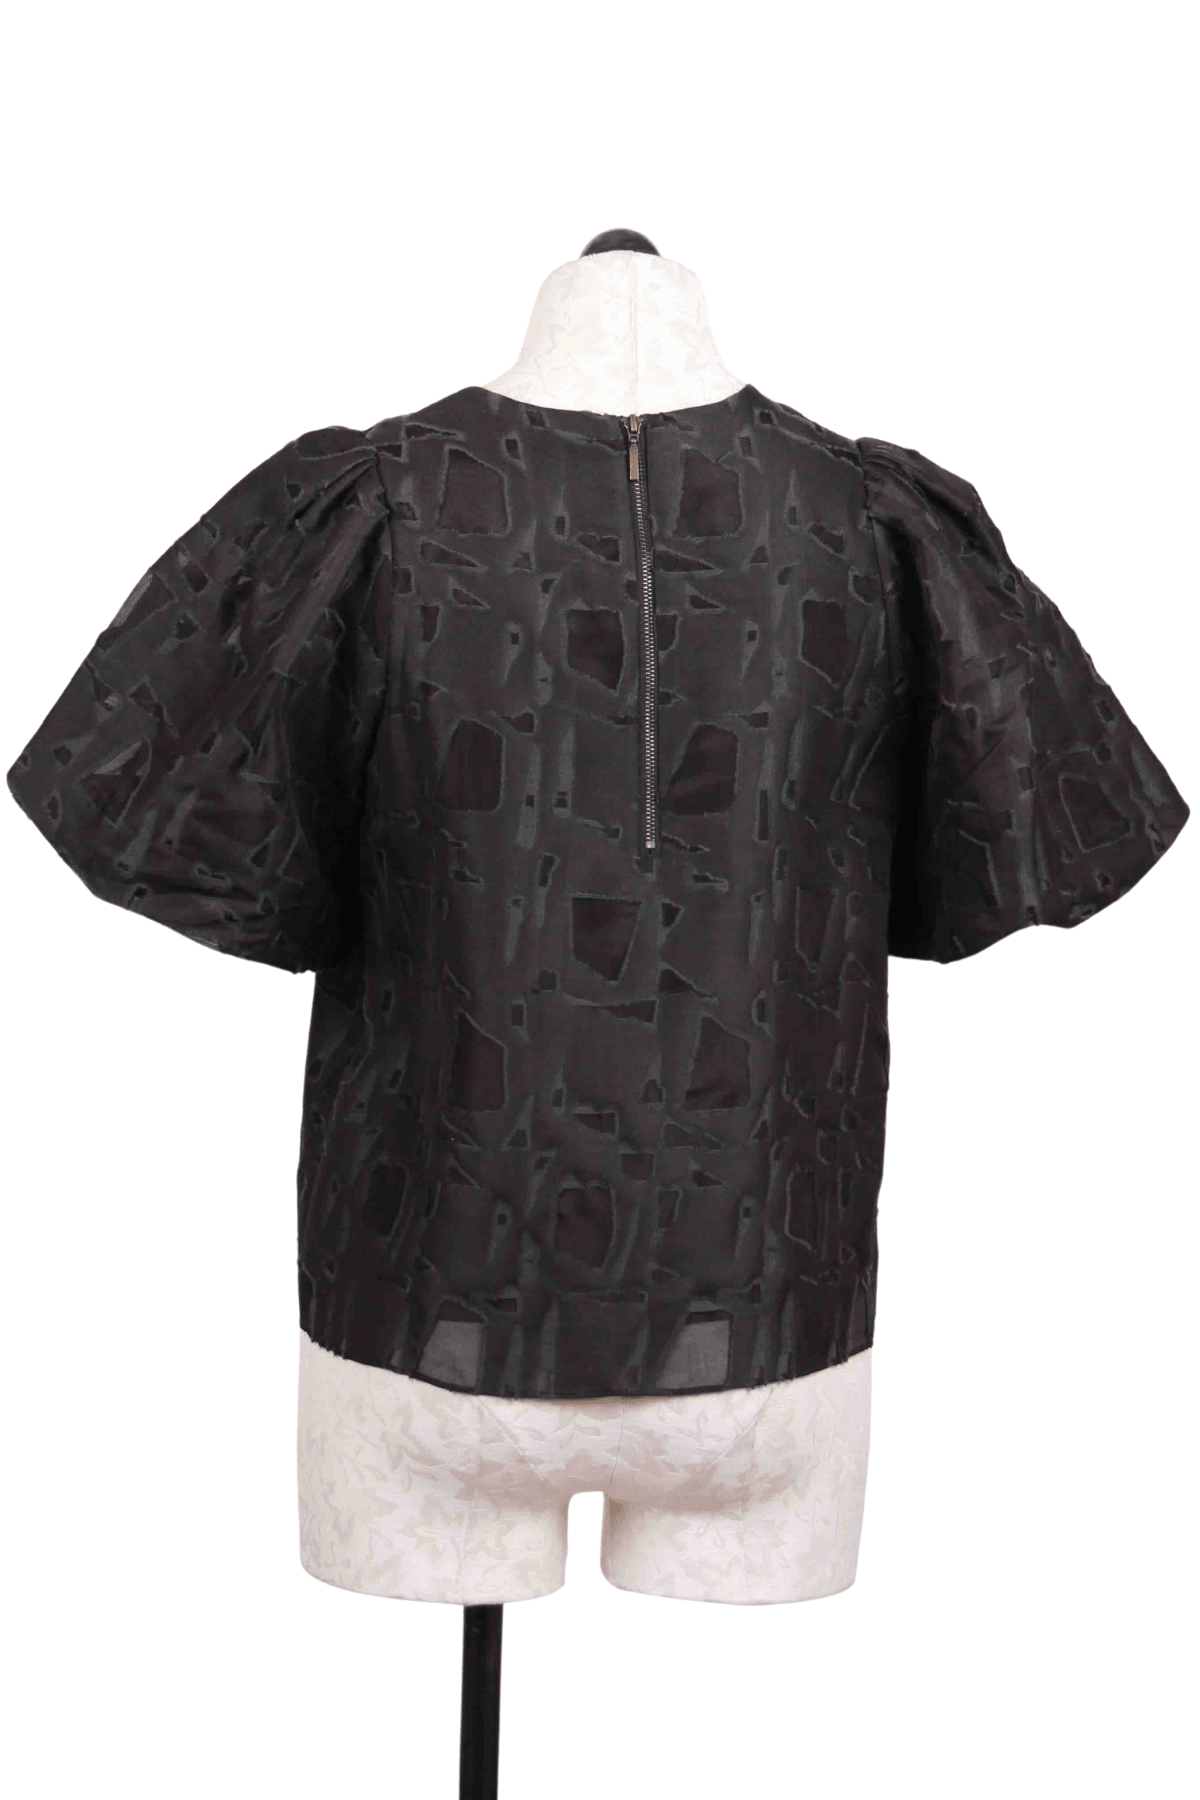 back view of Black Jessa Short Bag Sleeve Top by Marie Oliver in a textured jacquard fabric